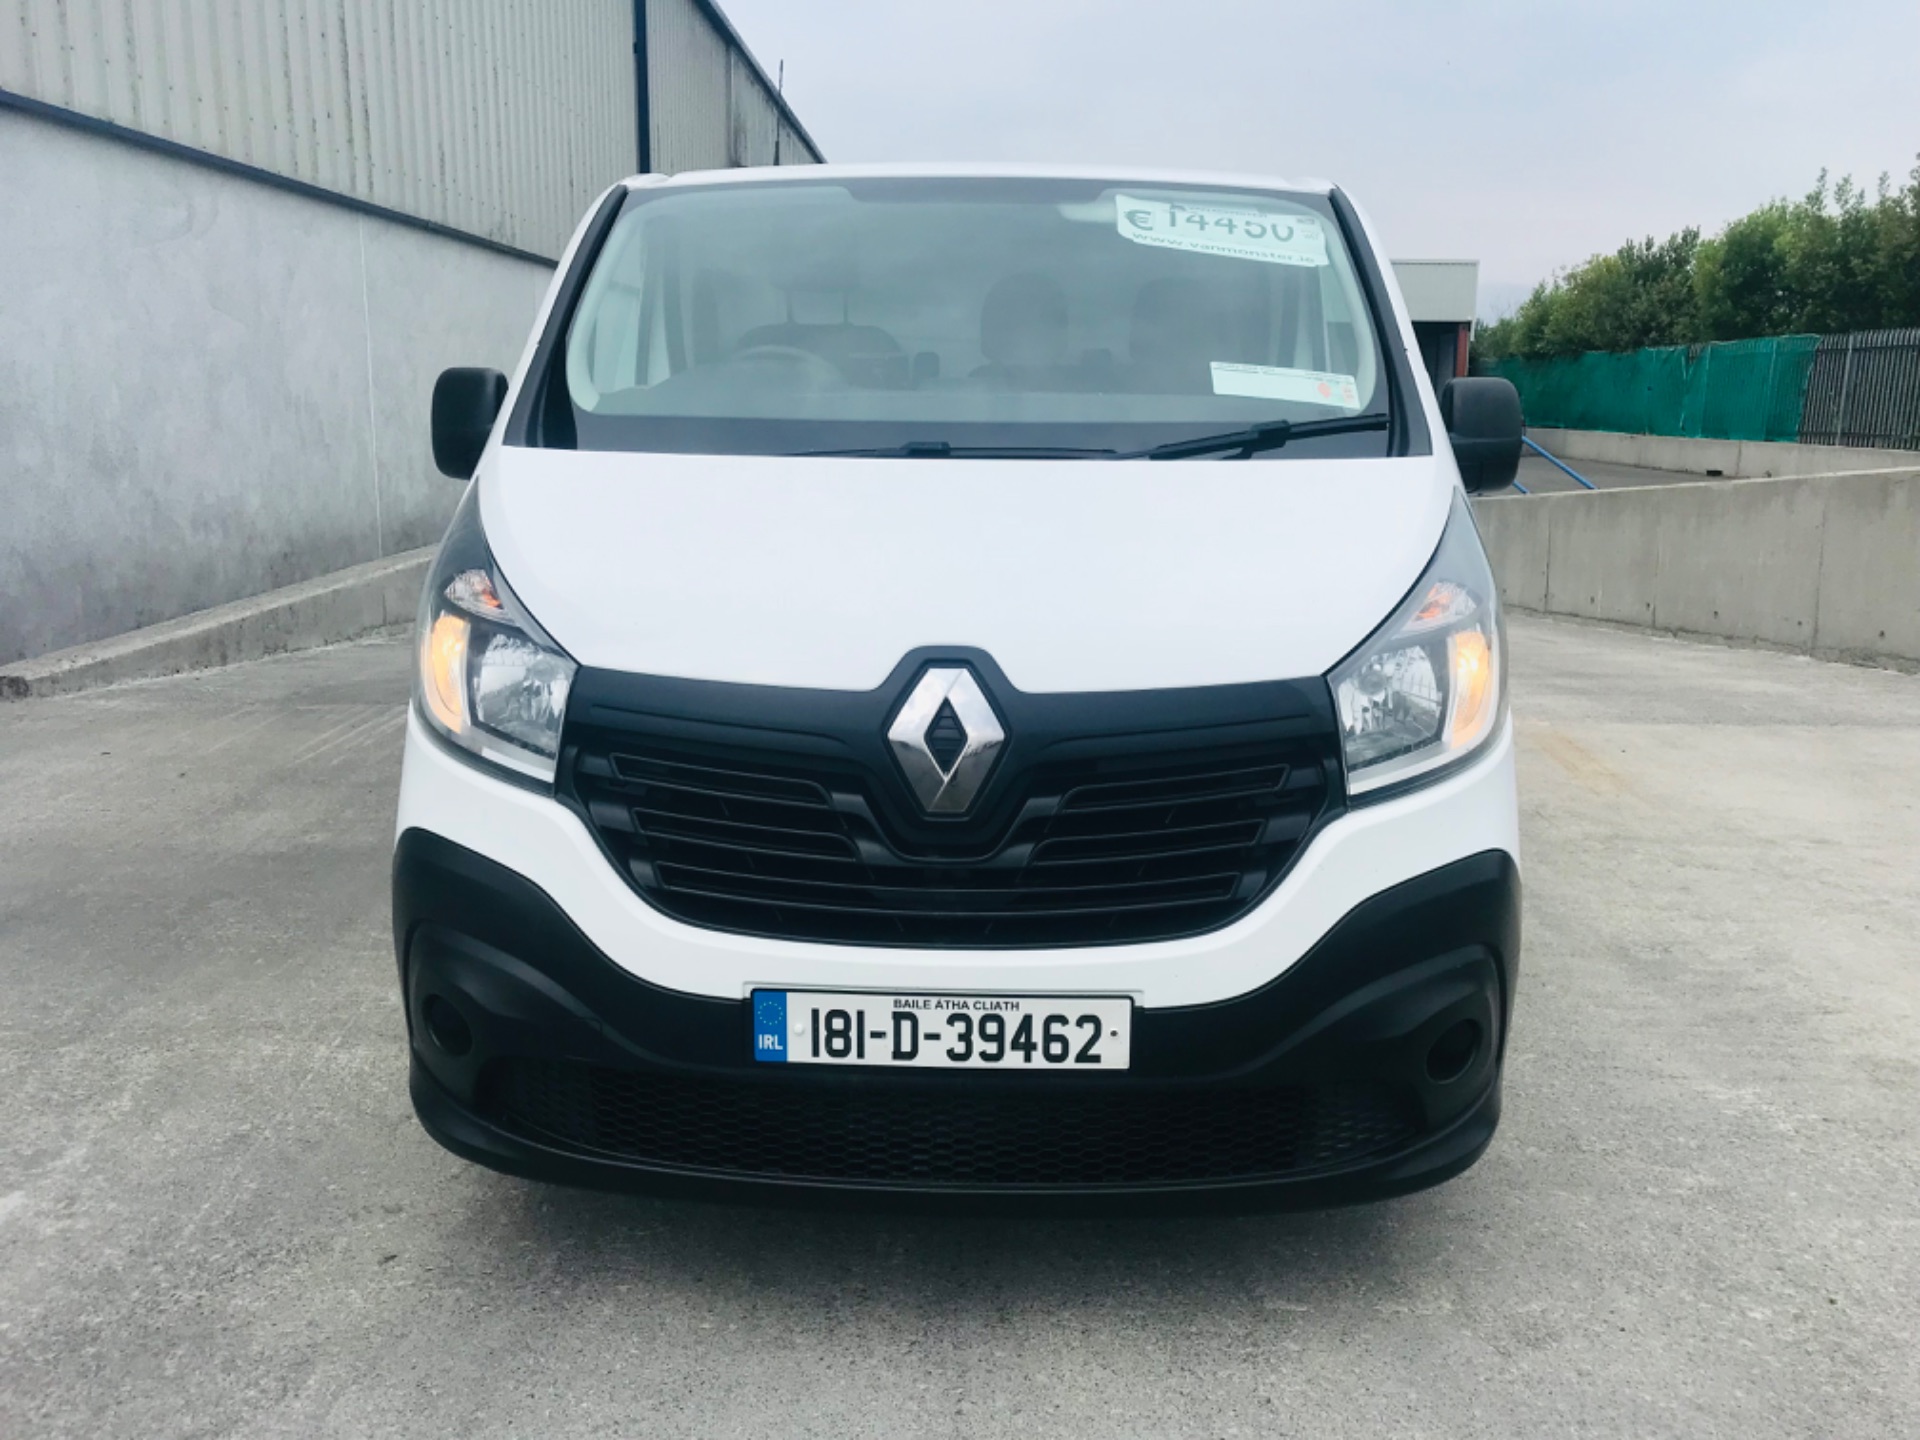 2018 Renault Trafic LL29 DCI 120 Business 3DR (181D39462) Thumbnail 2